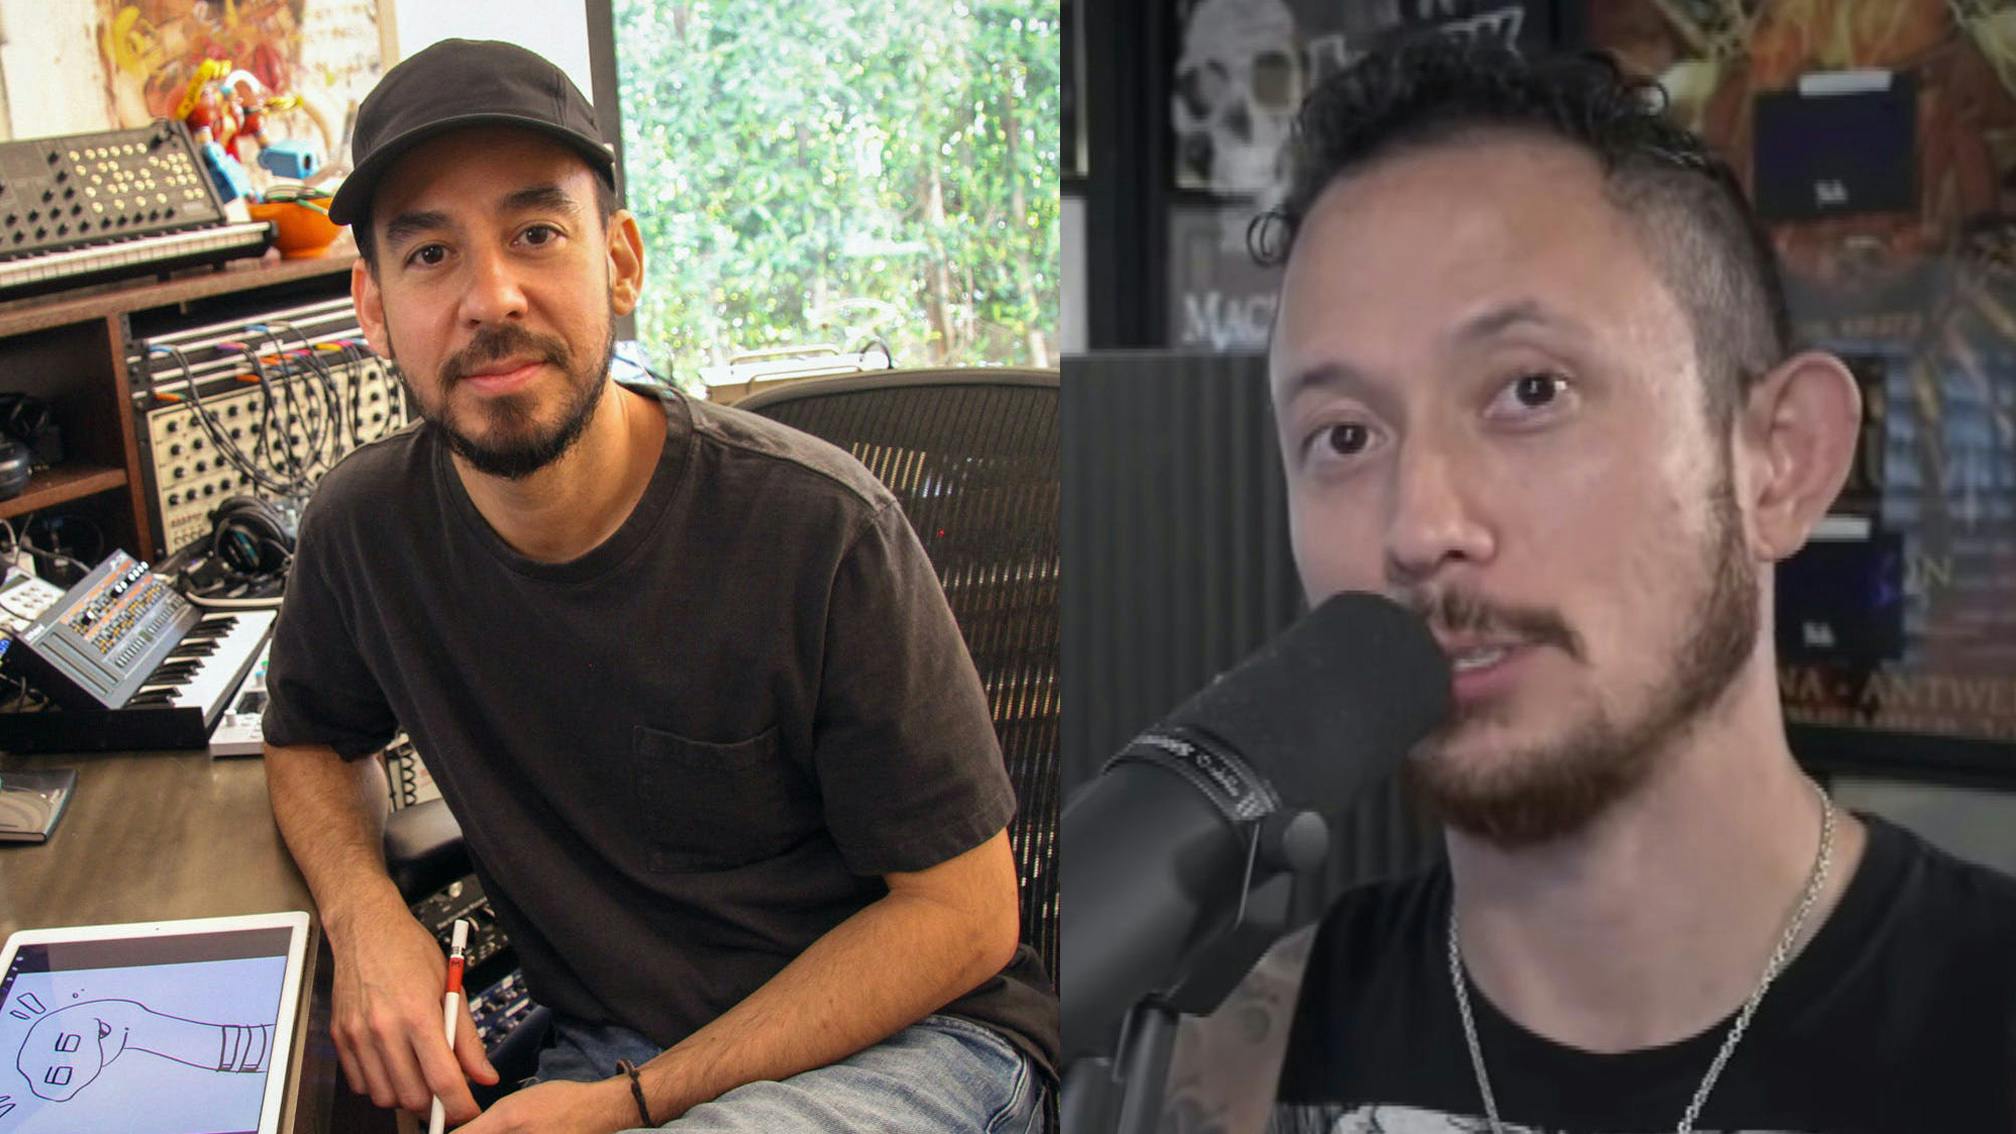 Linkin Park's Mike Shinoda and Trivium's Matt Heafy to collaborate on a new song via Twitch